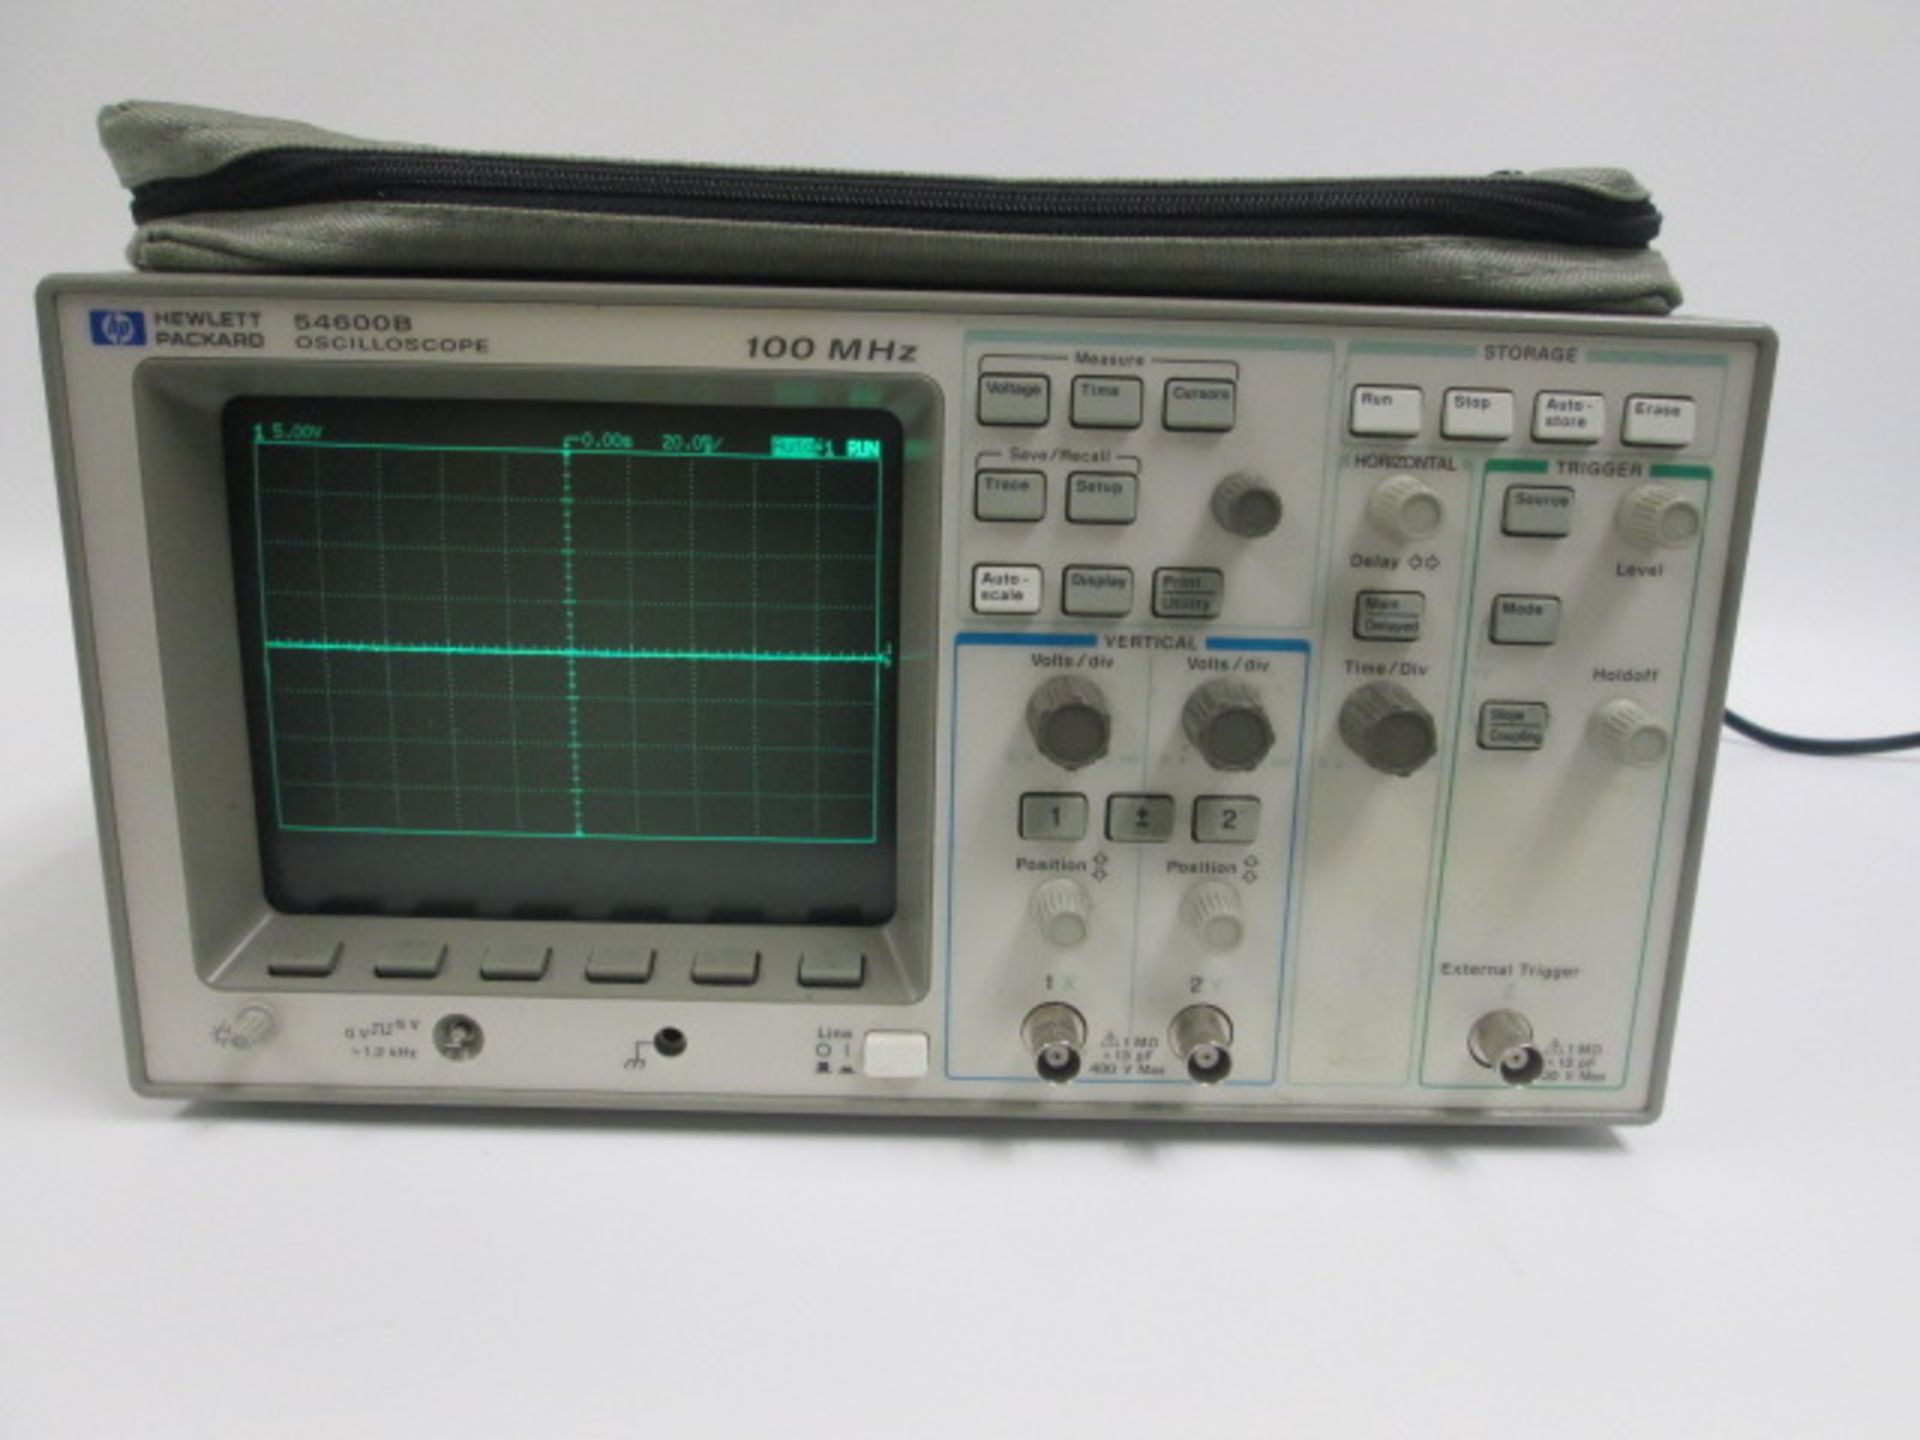 HP OSCILLOSCOPE 54600B 100MHZ SERIAL NUMBER: US37411605 - Image 5 of 5